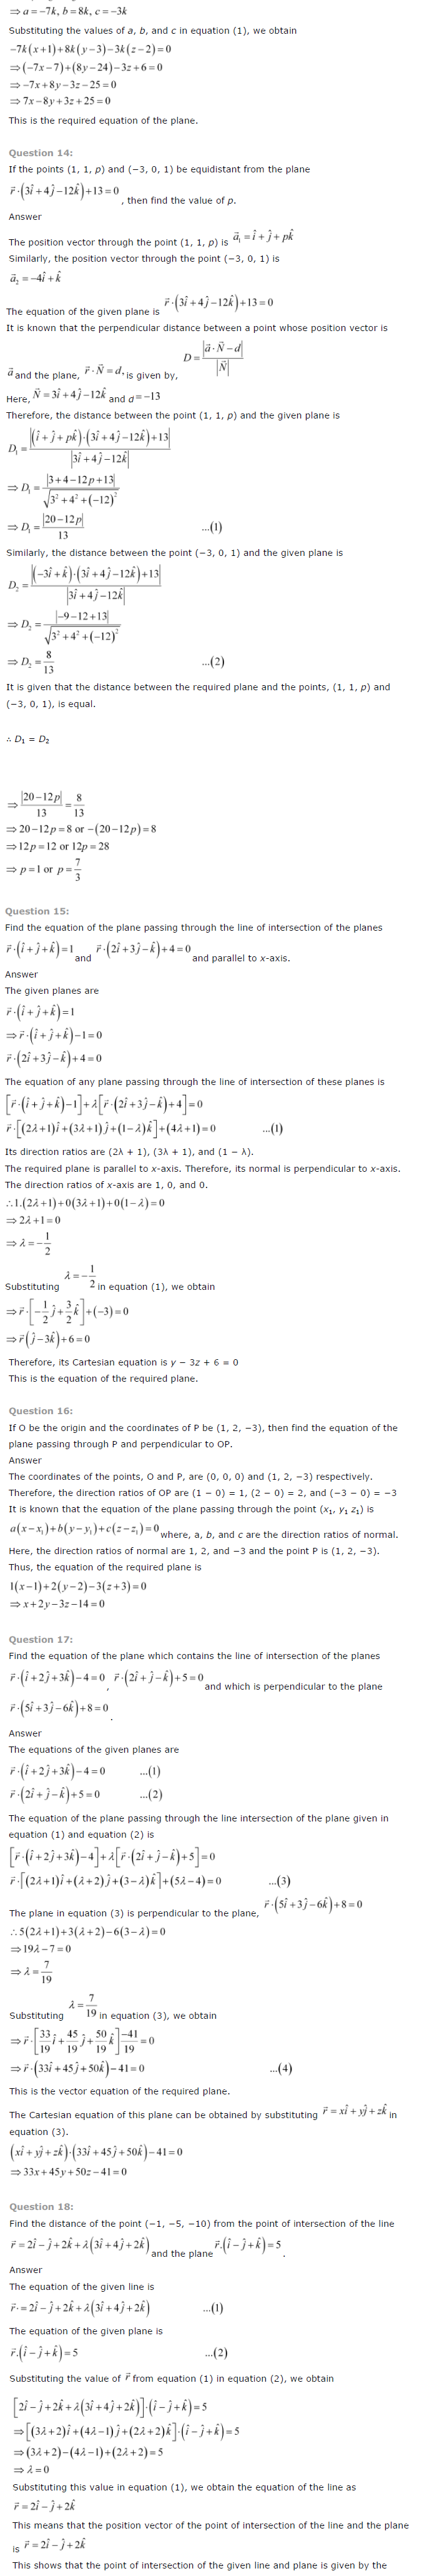 NCERT Solutions for Class 12 Maths Chapter 11 Three Dimensional Geometry ex 11.10